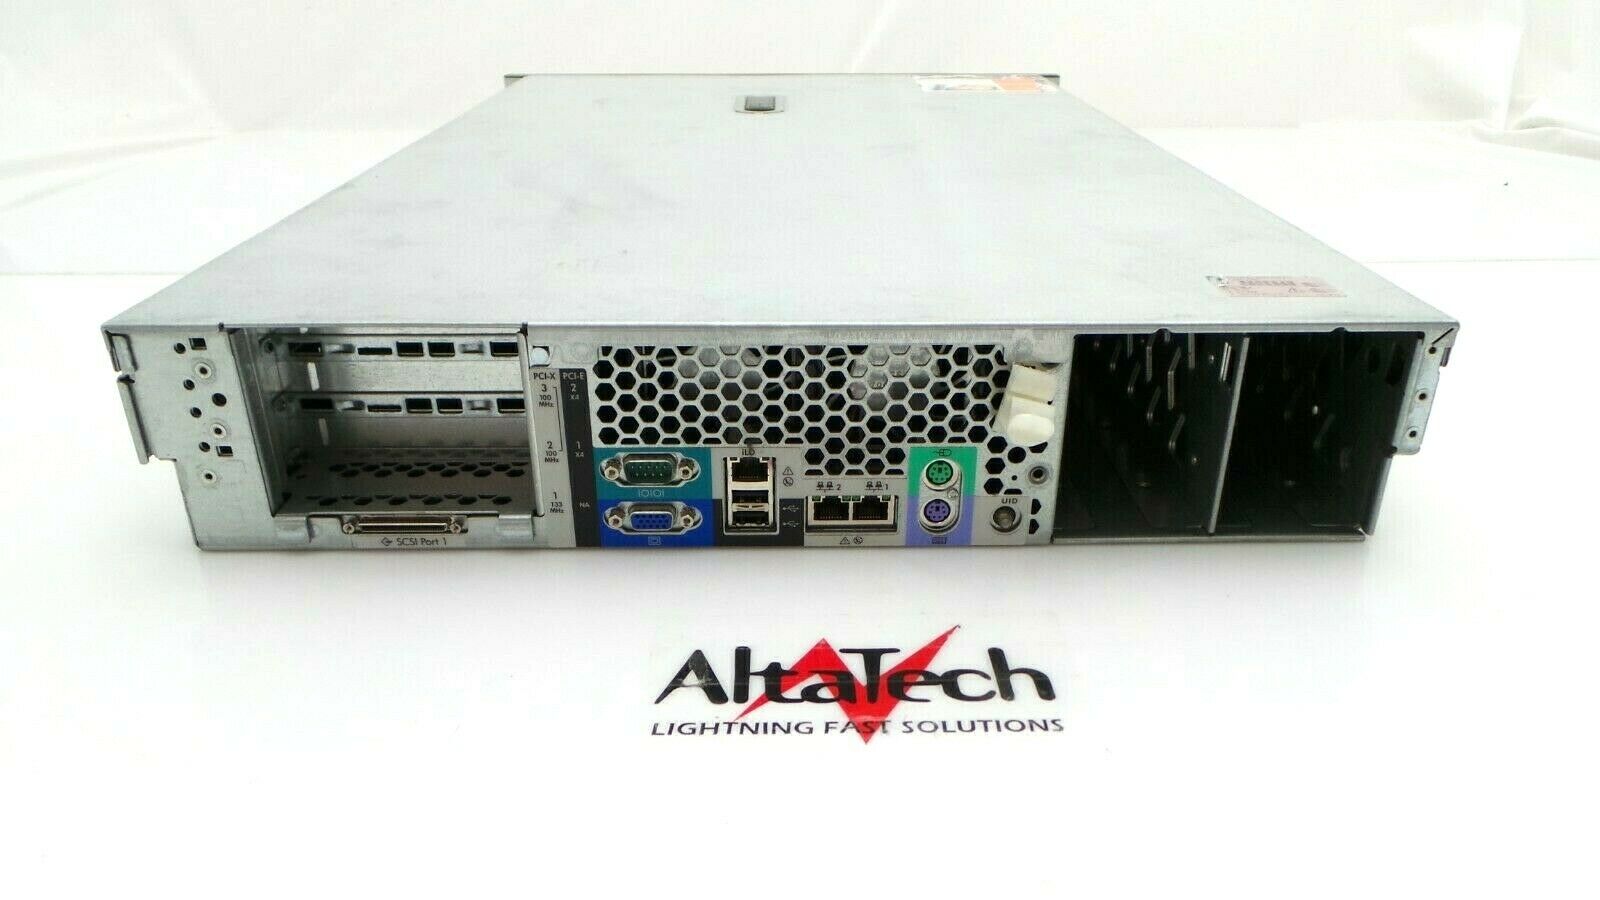 HP 371293-405 Proliant DL380 G4 Base Model CTO Chassis, Used